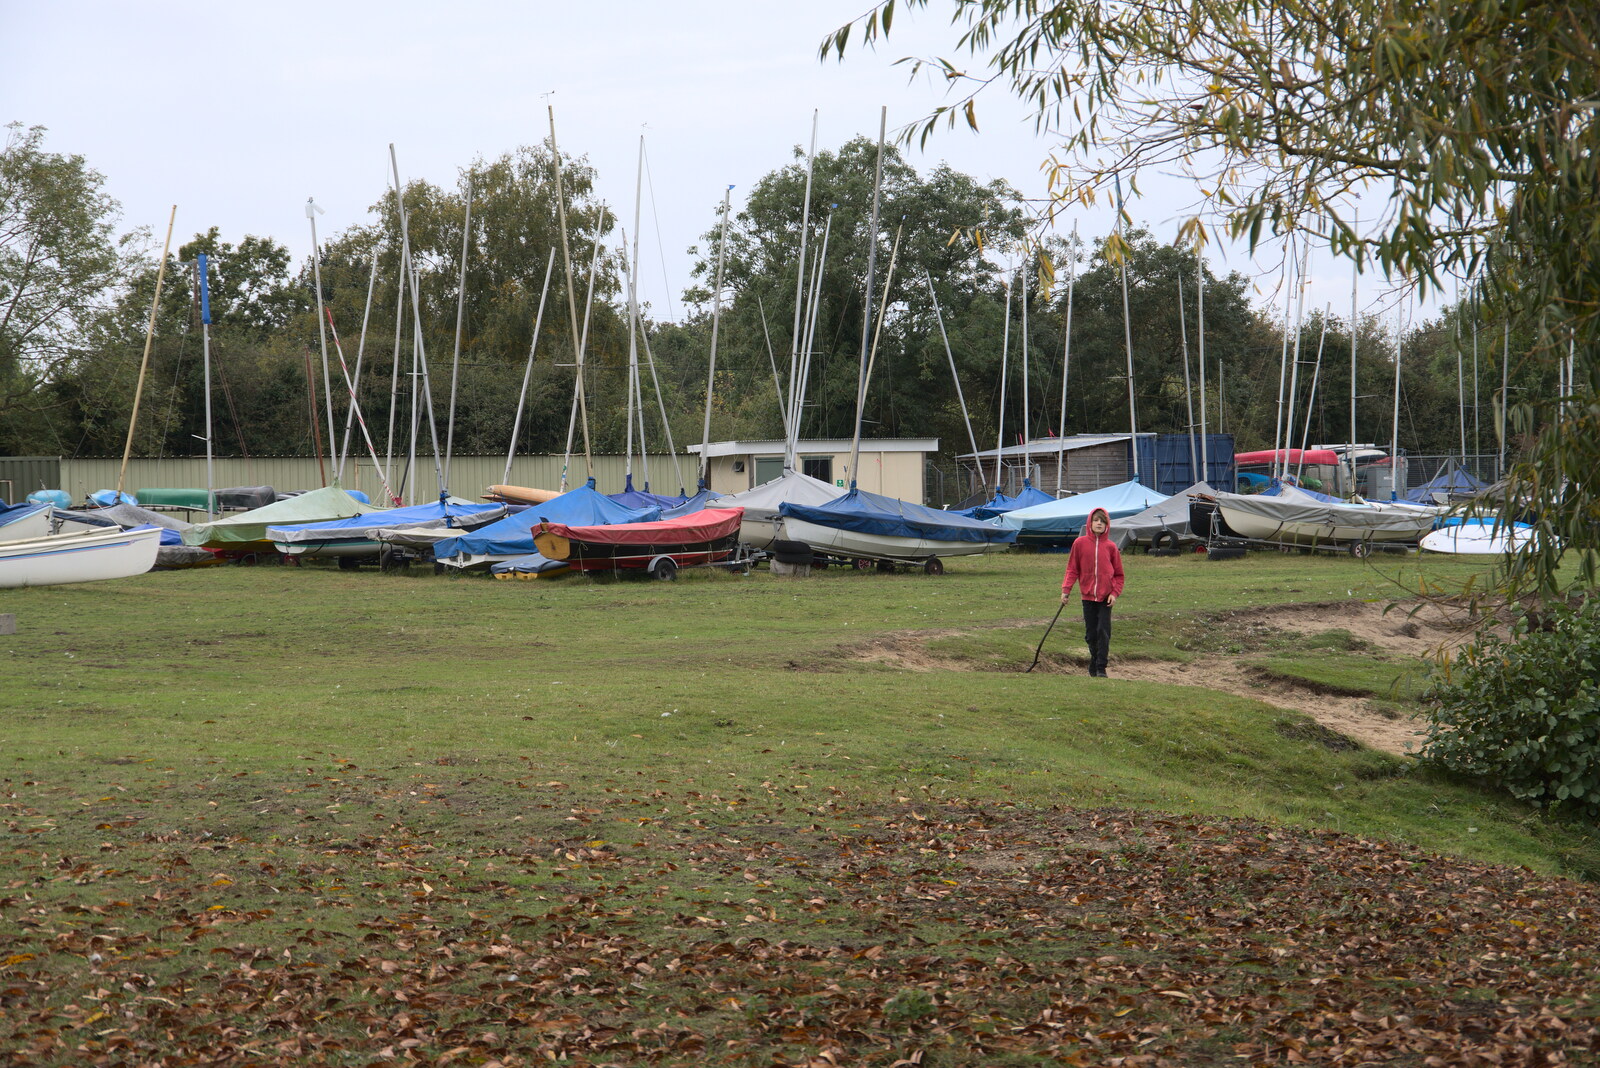 Harry roams around from A Trip to Weybread Sailing Club, Harleston, Norfolk - 17th October 2021